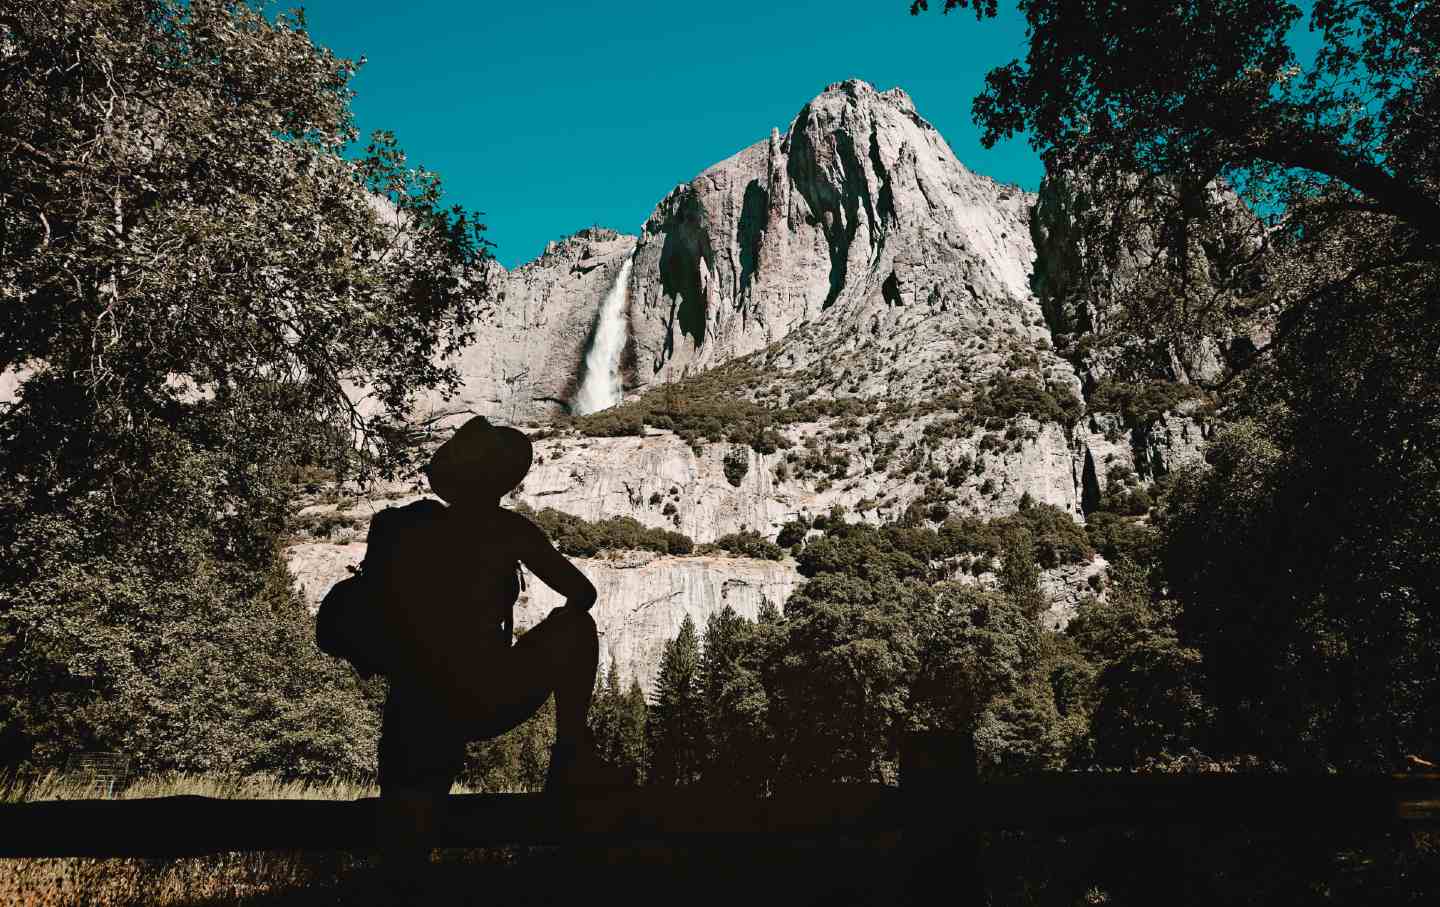 A hiker in Yosemite National Park